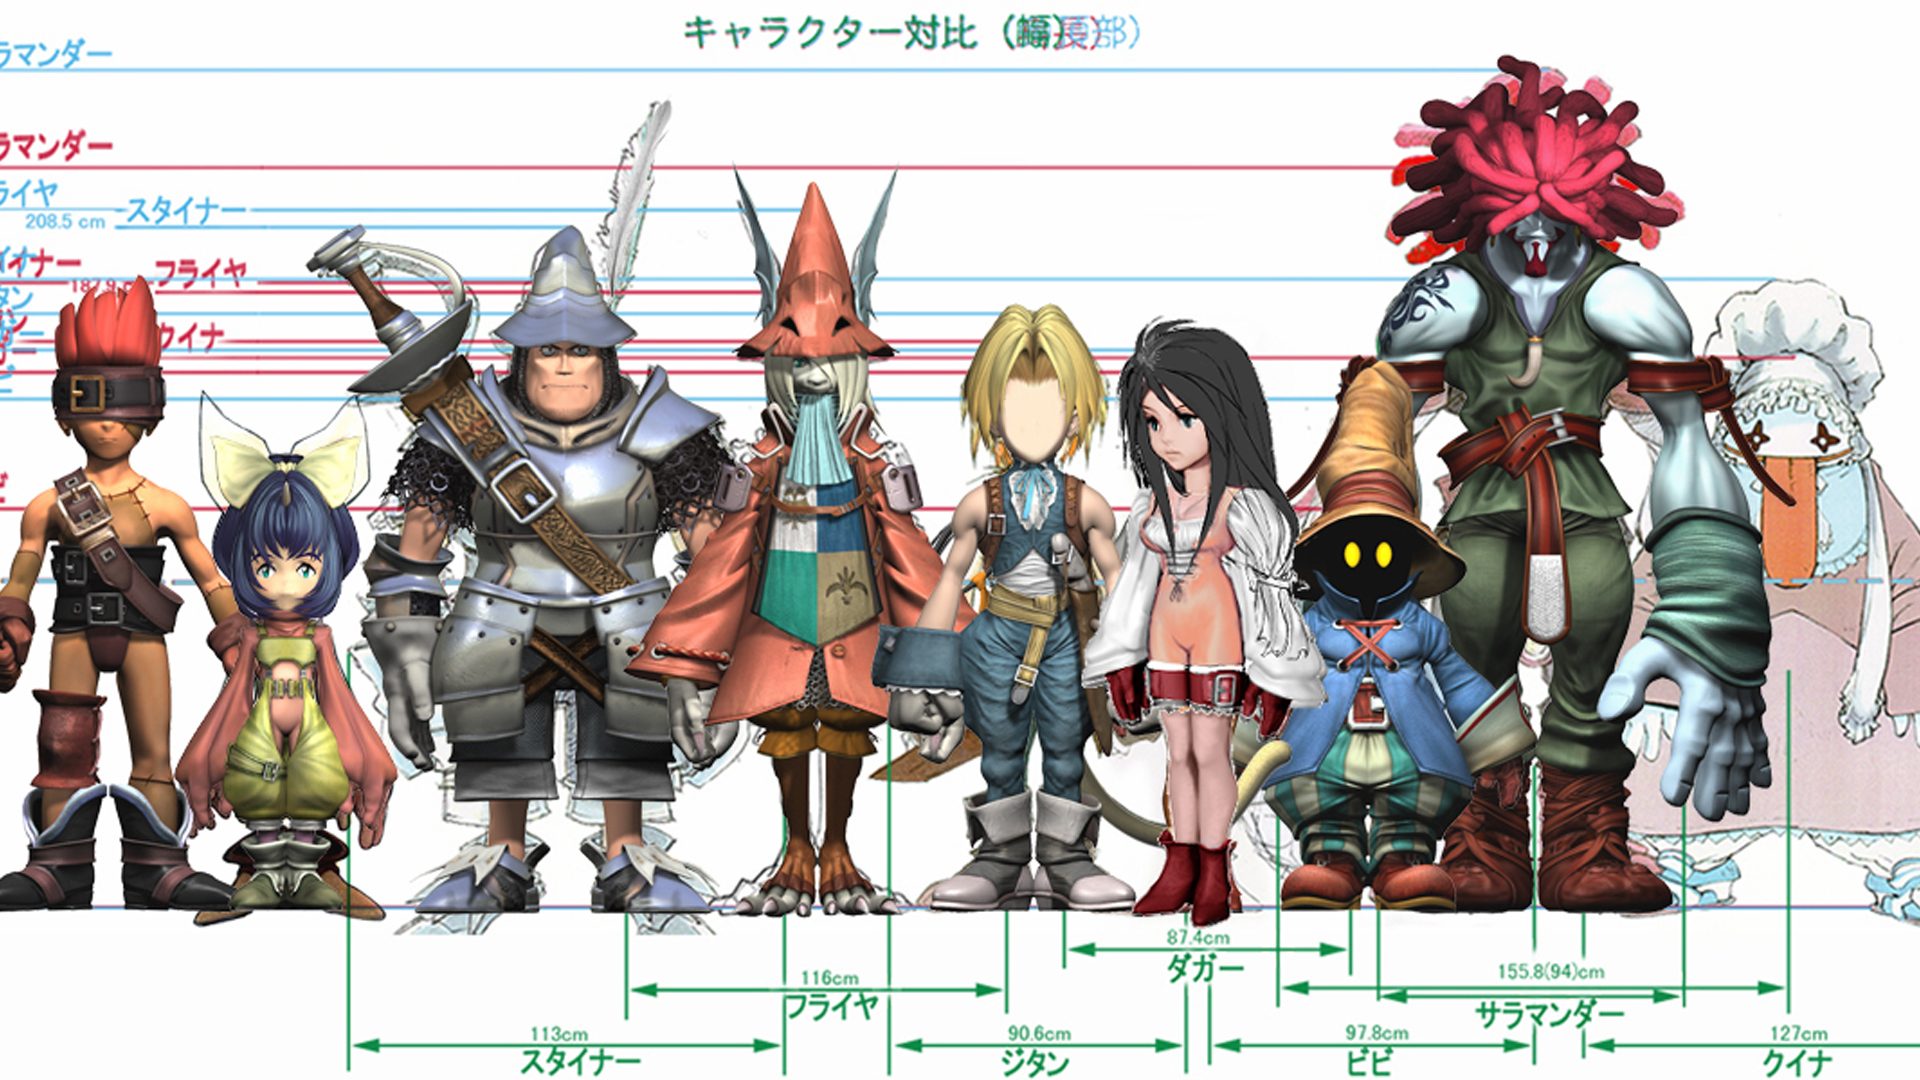 glimt Muldyr marv Memories of life working on Final Fantasy IX, available with PlayStation  Now – PlayStation.Blog